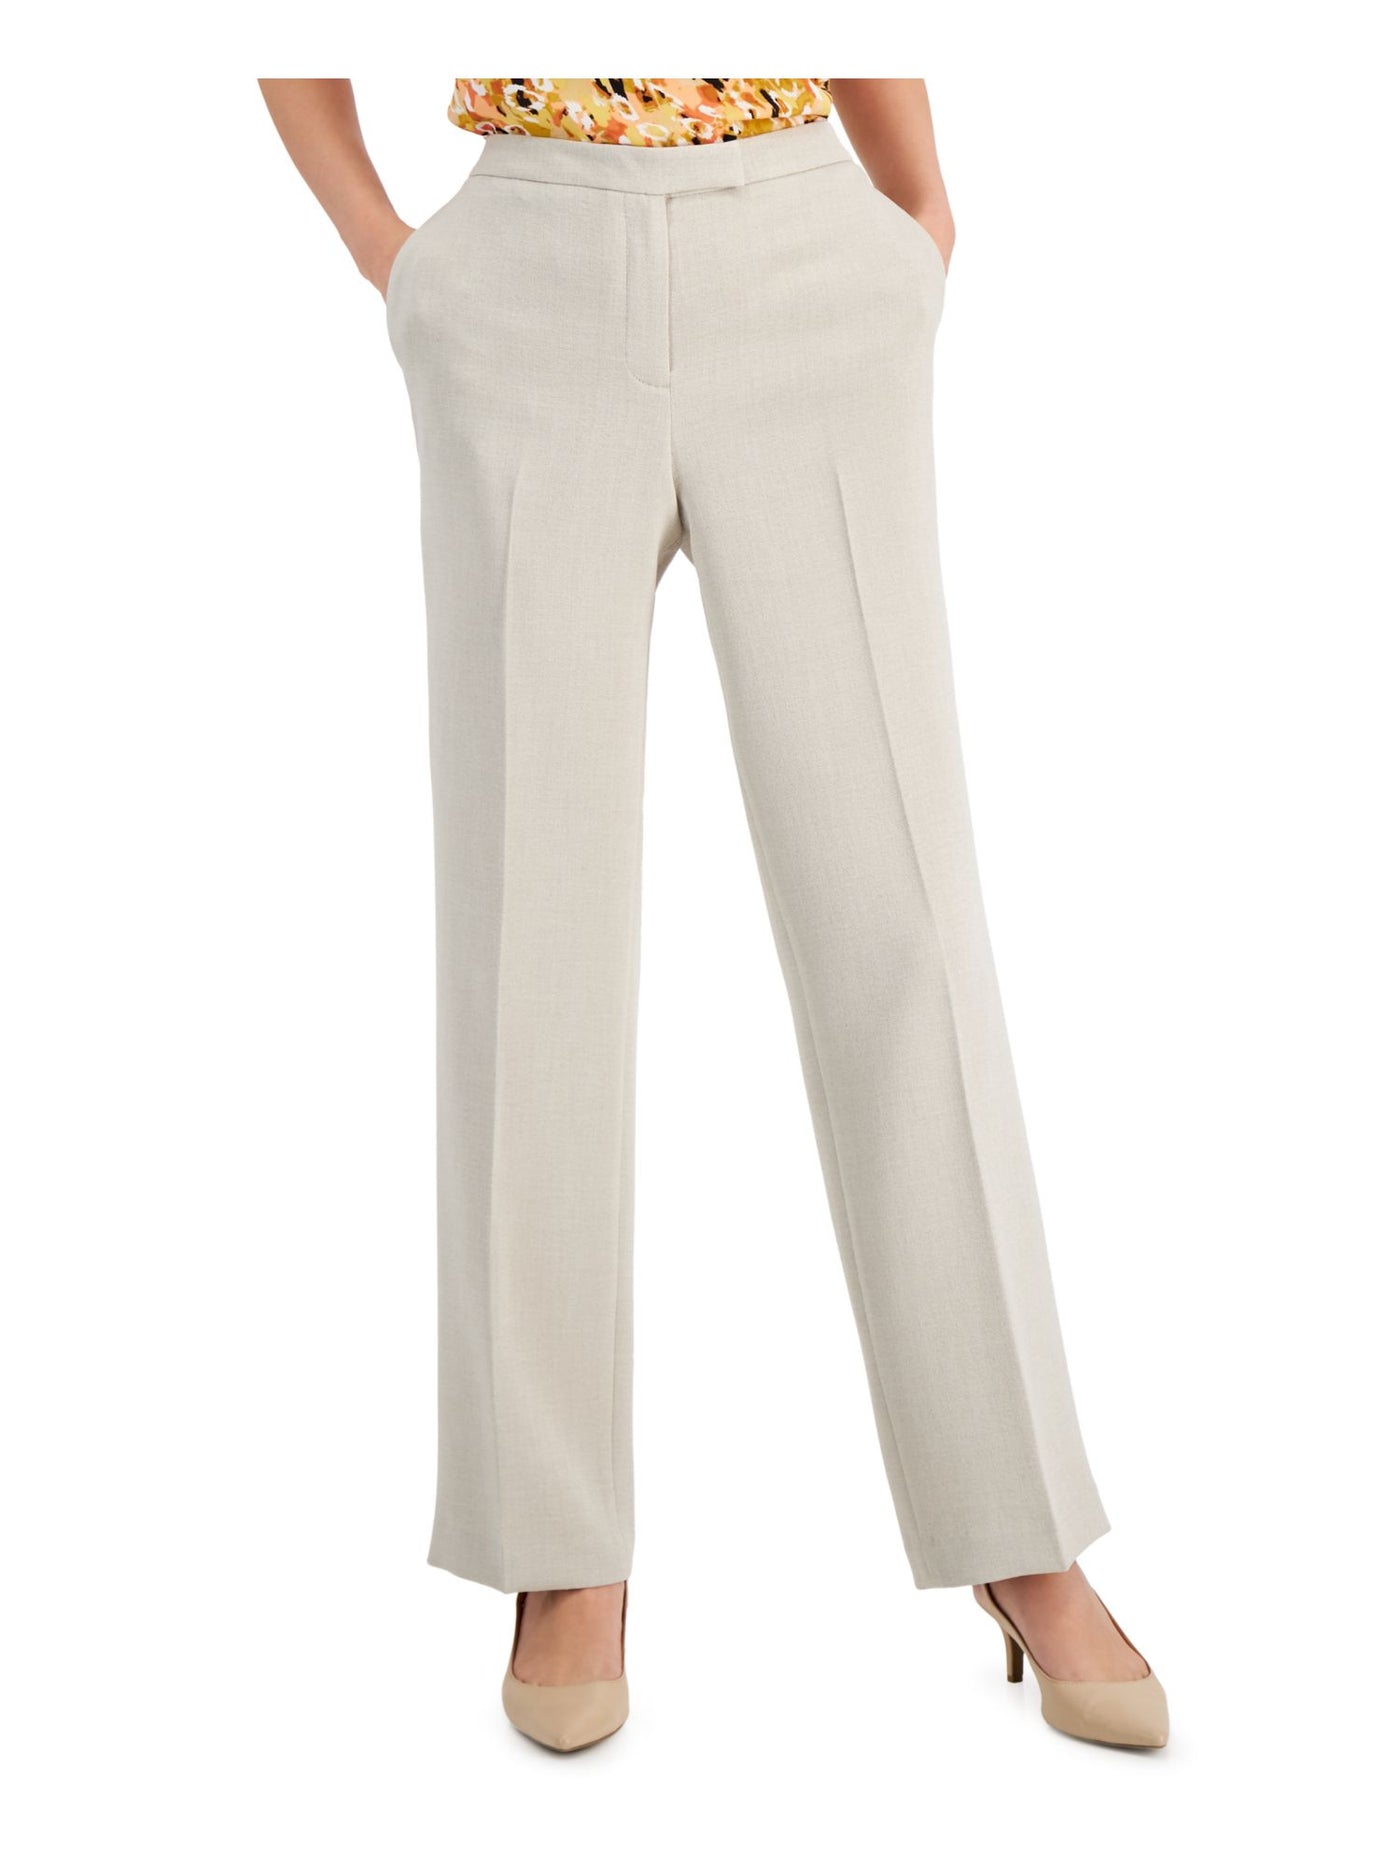 KASPER Womens Beige Zippered Pocketed Extended Tab Creased Trousers Wear To Work Straight leg Pants 18